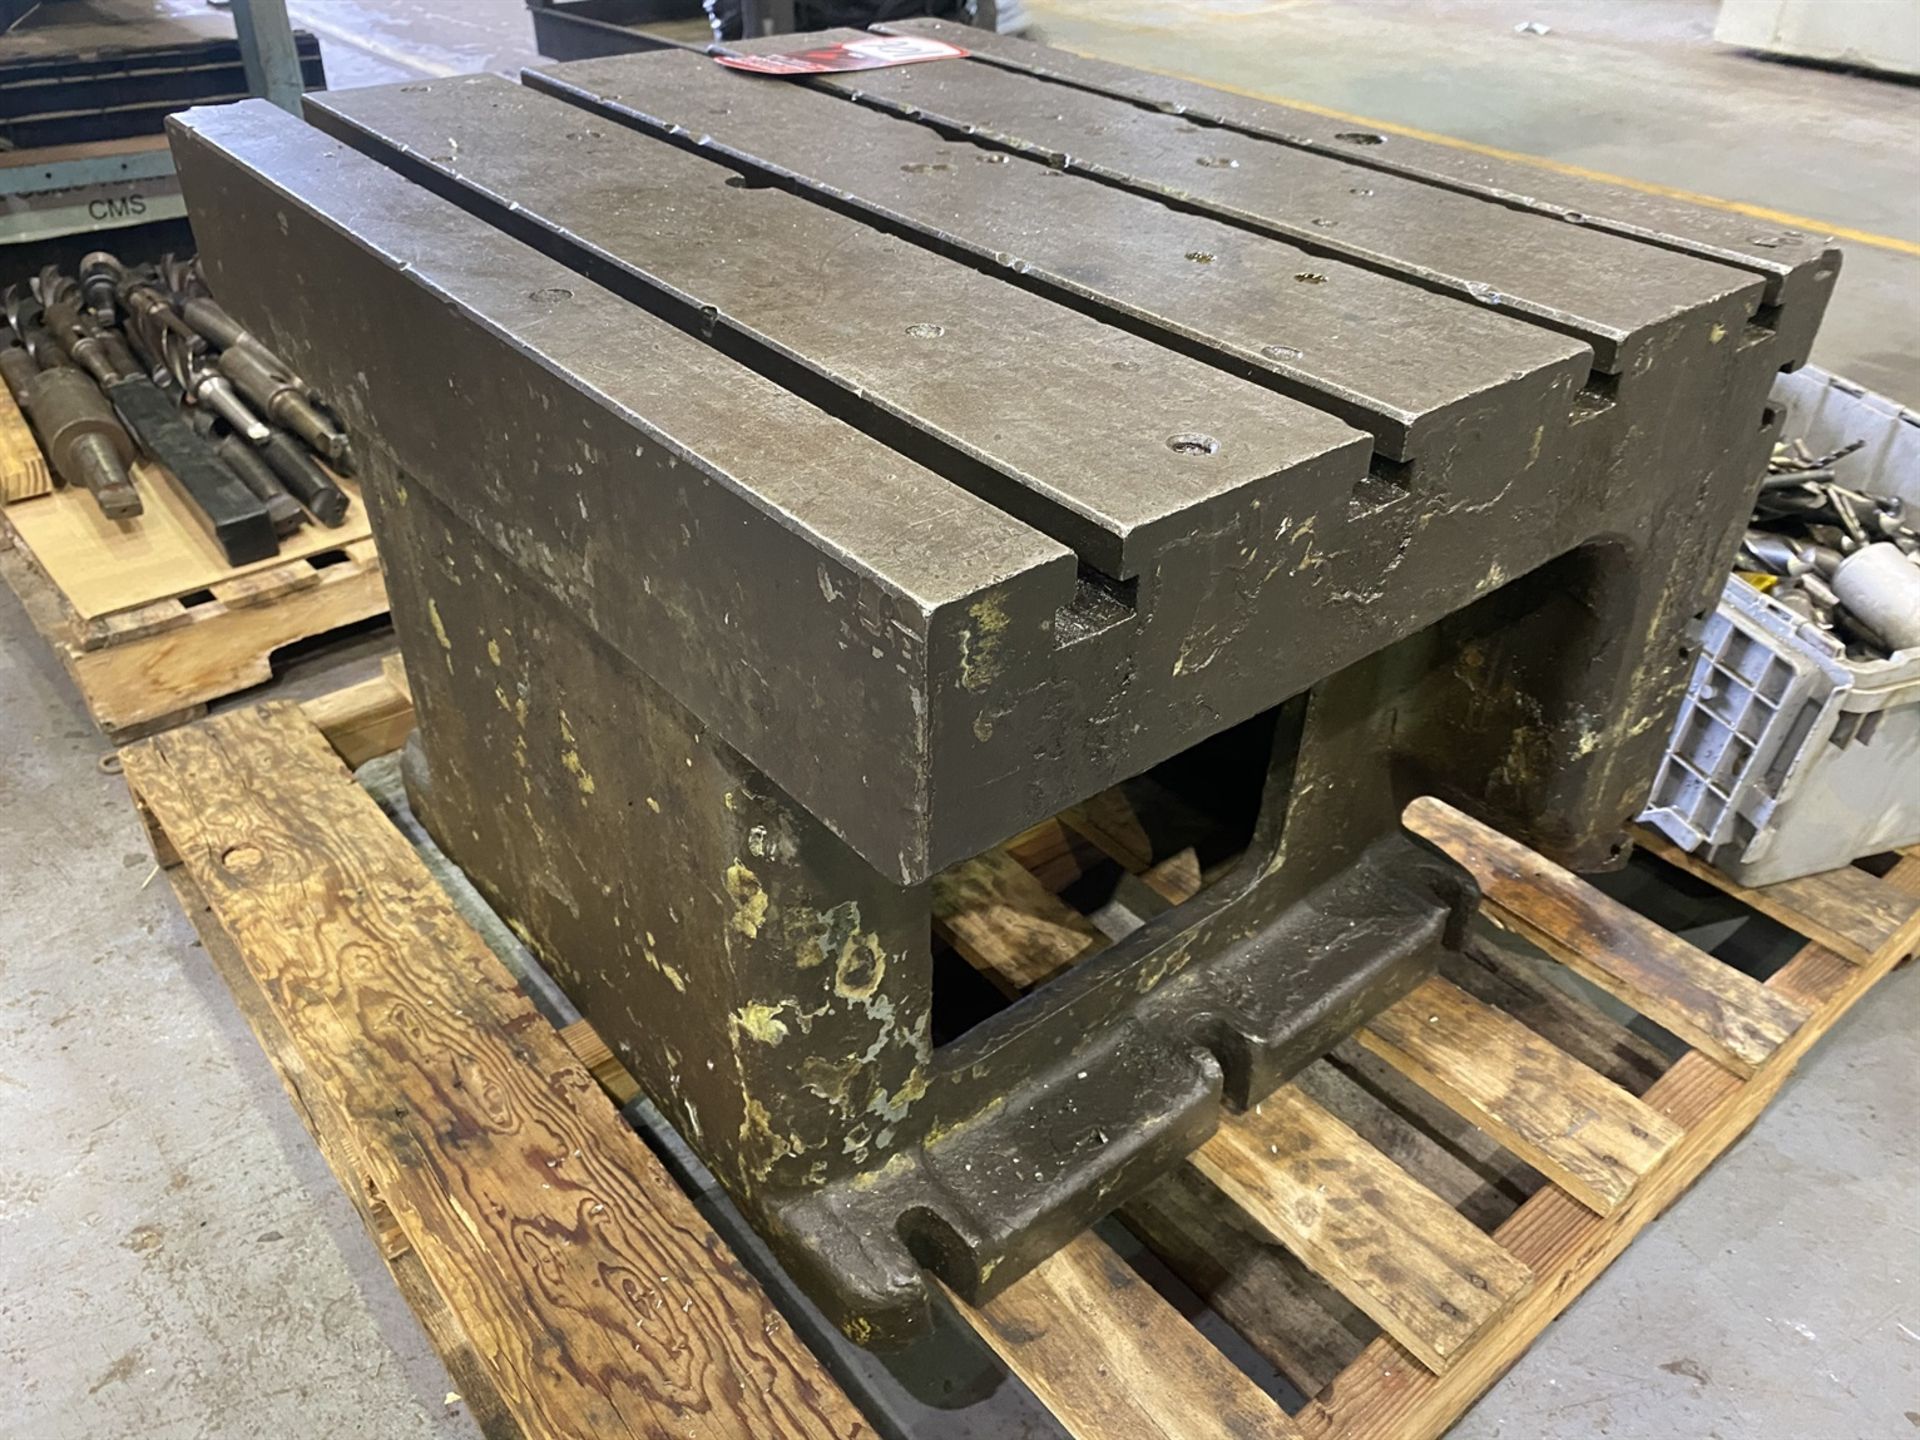 T-Slotted Box Type Table, 30" x 24" x 16.5" - Image 2 of 3